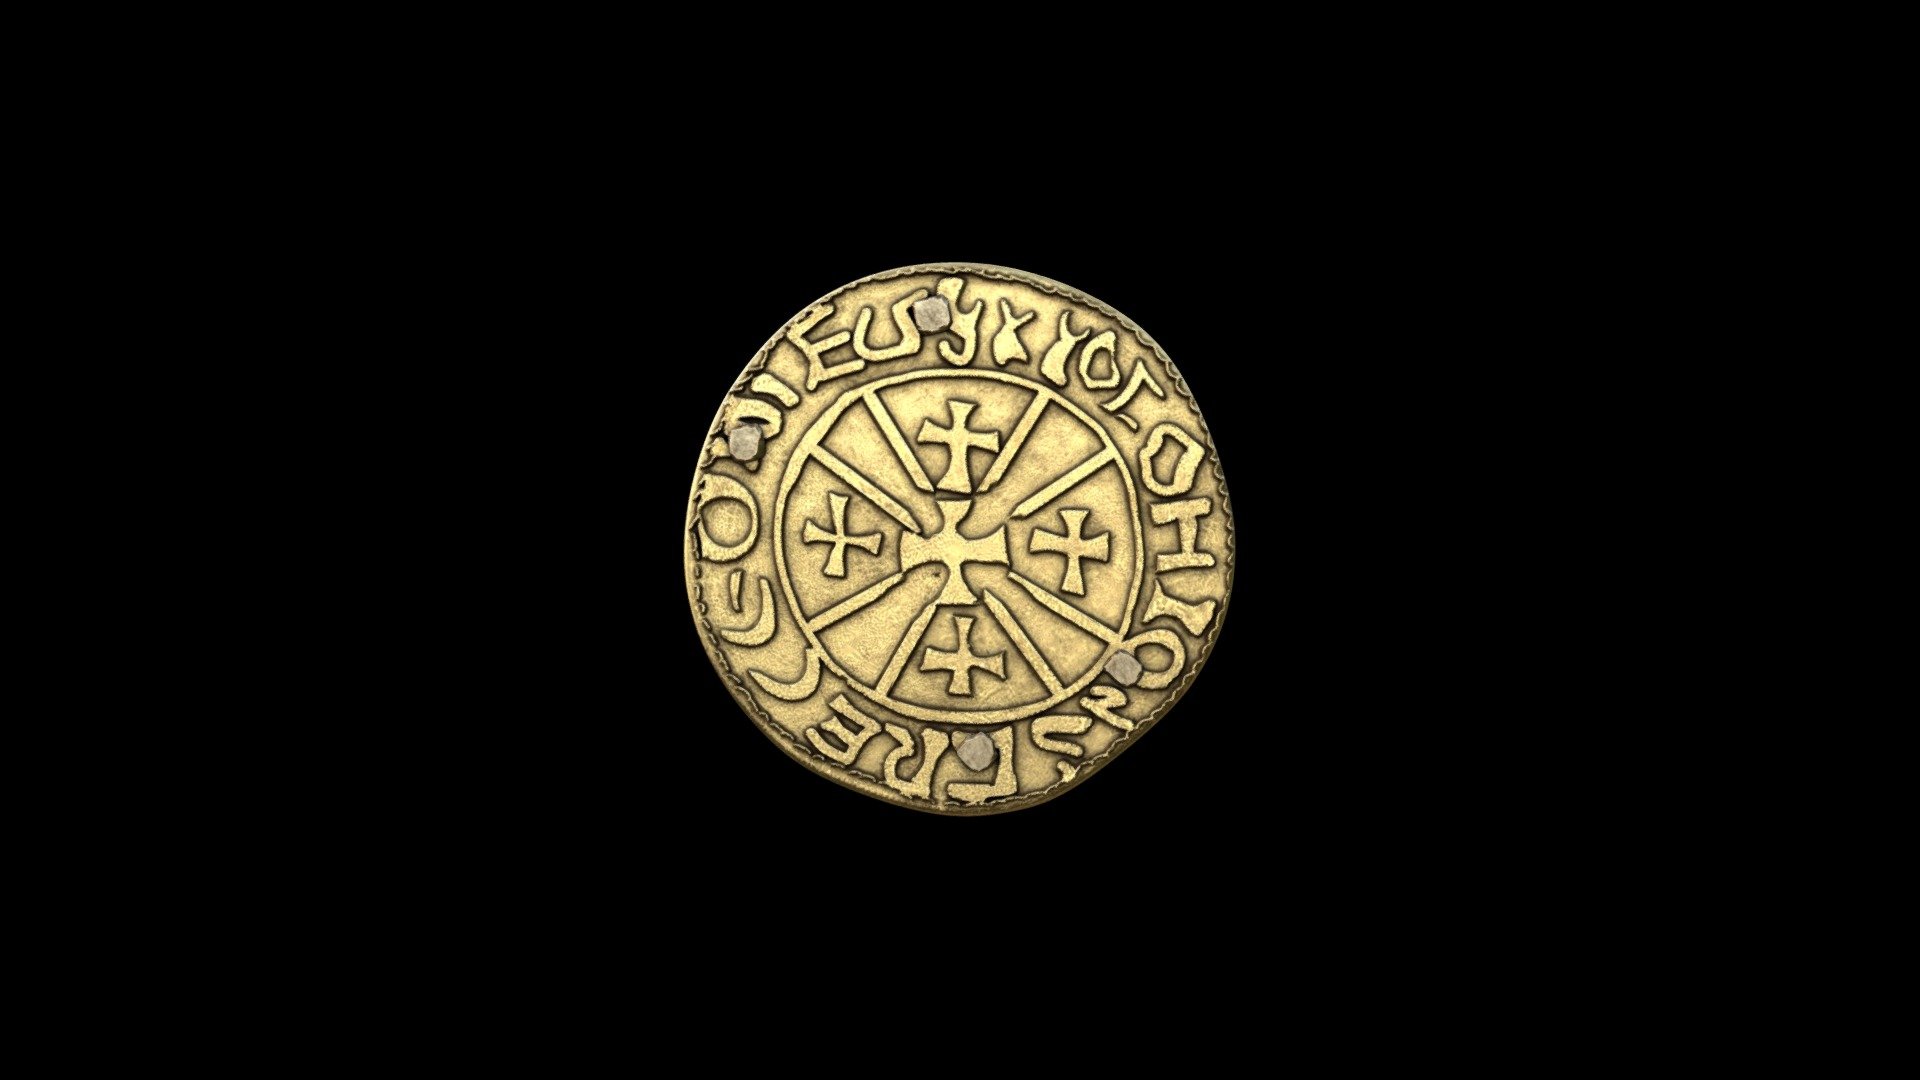 This digital reconstruction depicts an early medieval brooch found in 2022 by a metal detectorist in Wiltshire - United Kingdom.  The brooch was made using a coin (penny) dating to the early 1050s CE during the reign of Edward the Confessor (1042-1066).

Interestingly it was the reverse side of the coin that was displayed when the brooch was worn - presumably because it had crosses on it and as such was a form of religious badge.

For more information on this find see Current Archaeology magazine - October 29 2023 - link below:

https://the-past.com/shorts/objects/finds-tray-early-medieval-brooch/
&lsquo;

I have not published many models on Sketchfab over the last few months because I have been busy making reconstruction models for the YouTube channel - Time Team Official - the monthly News Update videos - a great channel to watch! - Medieval coin brooch - Download Free 3D model by Andy Woodhead (@Andywoodhead) 3d model